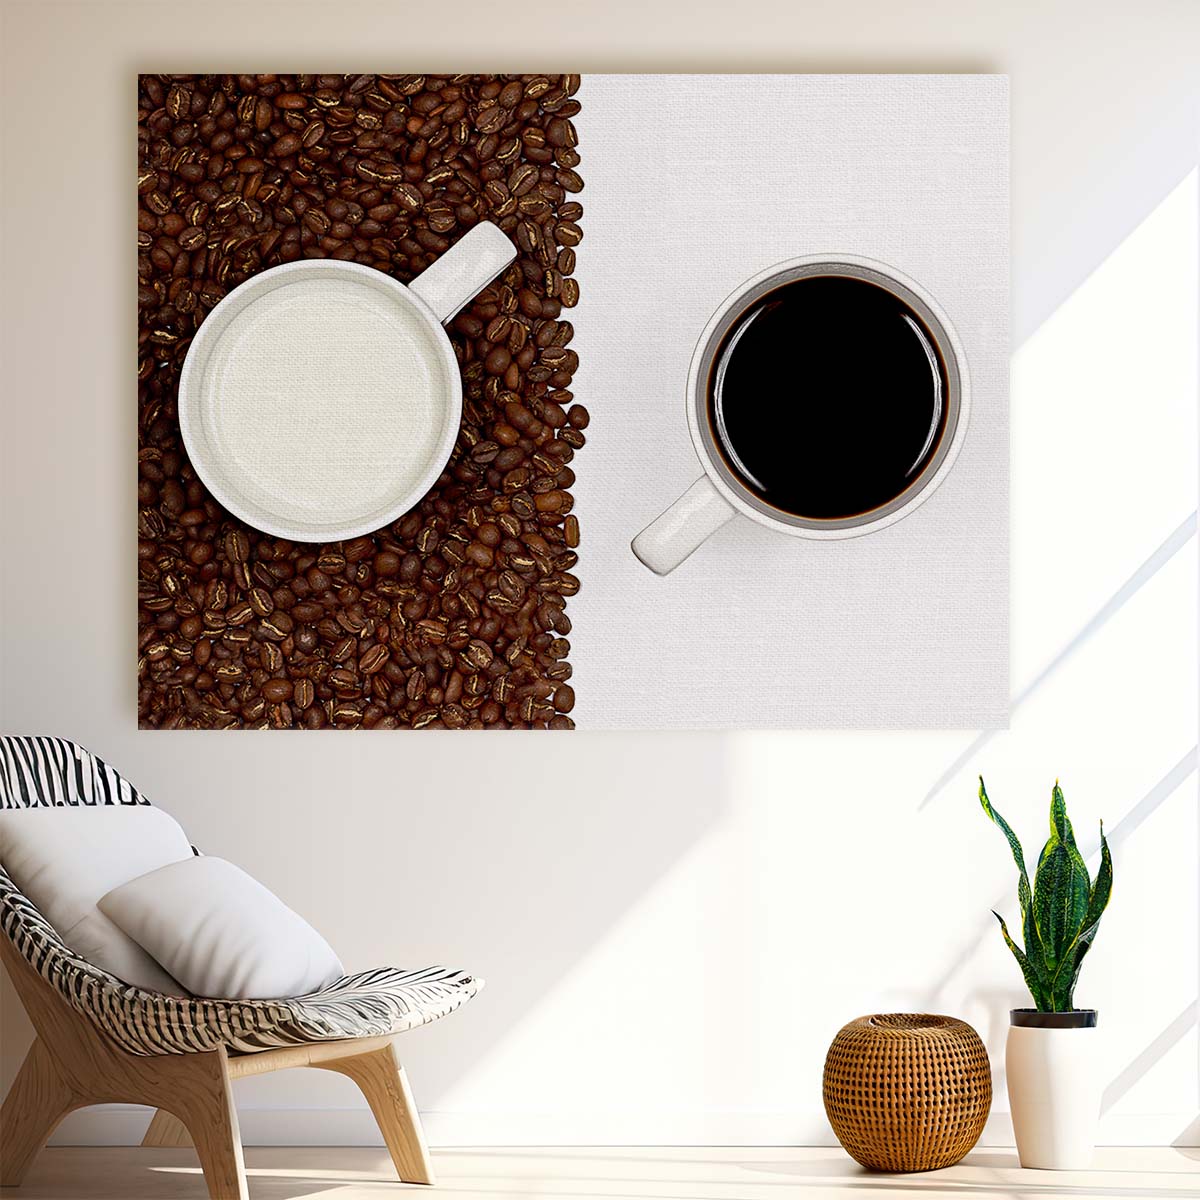 Yin Yang Coffee & Milk Cafe Kitchen Wall Art by Luxuriance Designs. Made in USA.